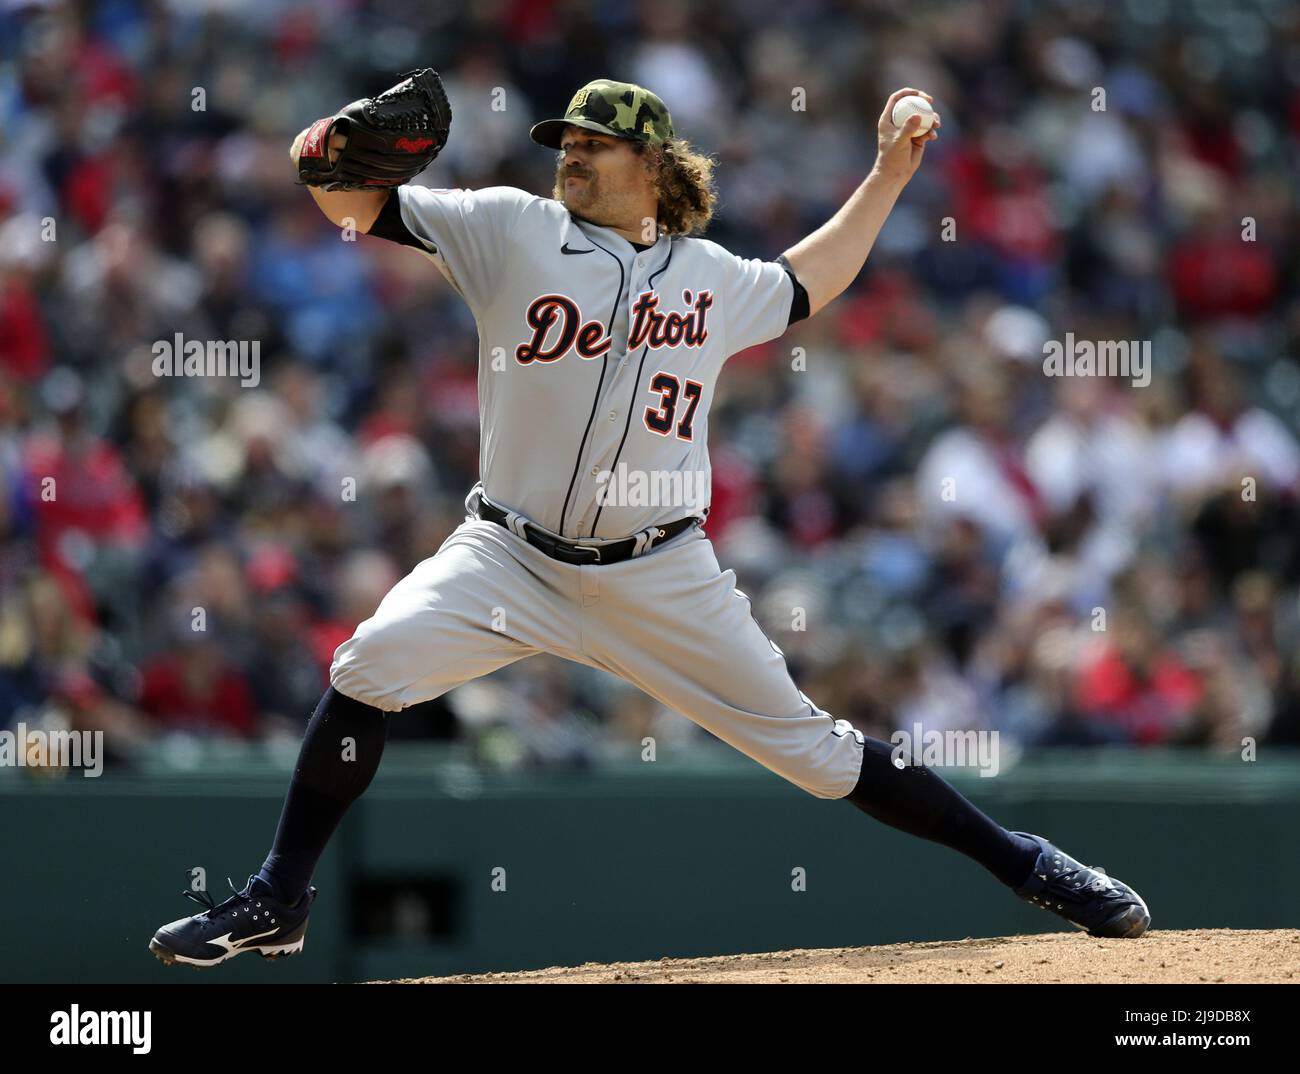 Cleveland, United States. 22nd May, 2022. Detroit Tigers Andrew Chafin (37) pitches in the sixth inning against the Cleveland Guardians at Progressive Field in Cleveland, Ohio on Sunday, May 22, 2022. Photo by Aaron Josefczyk/UPI Credit: UPI/Alamy Live News Stock Photo